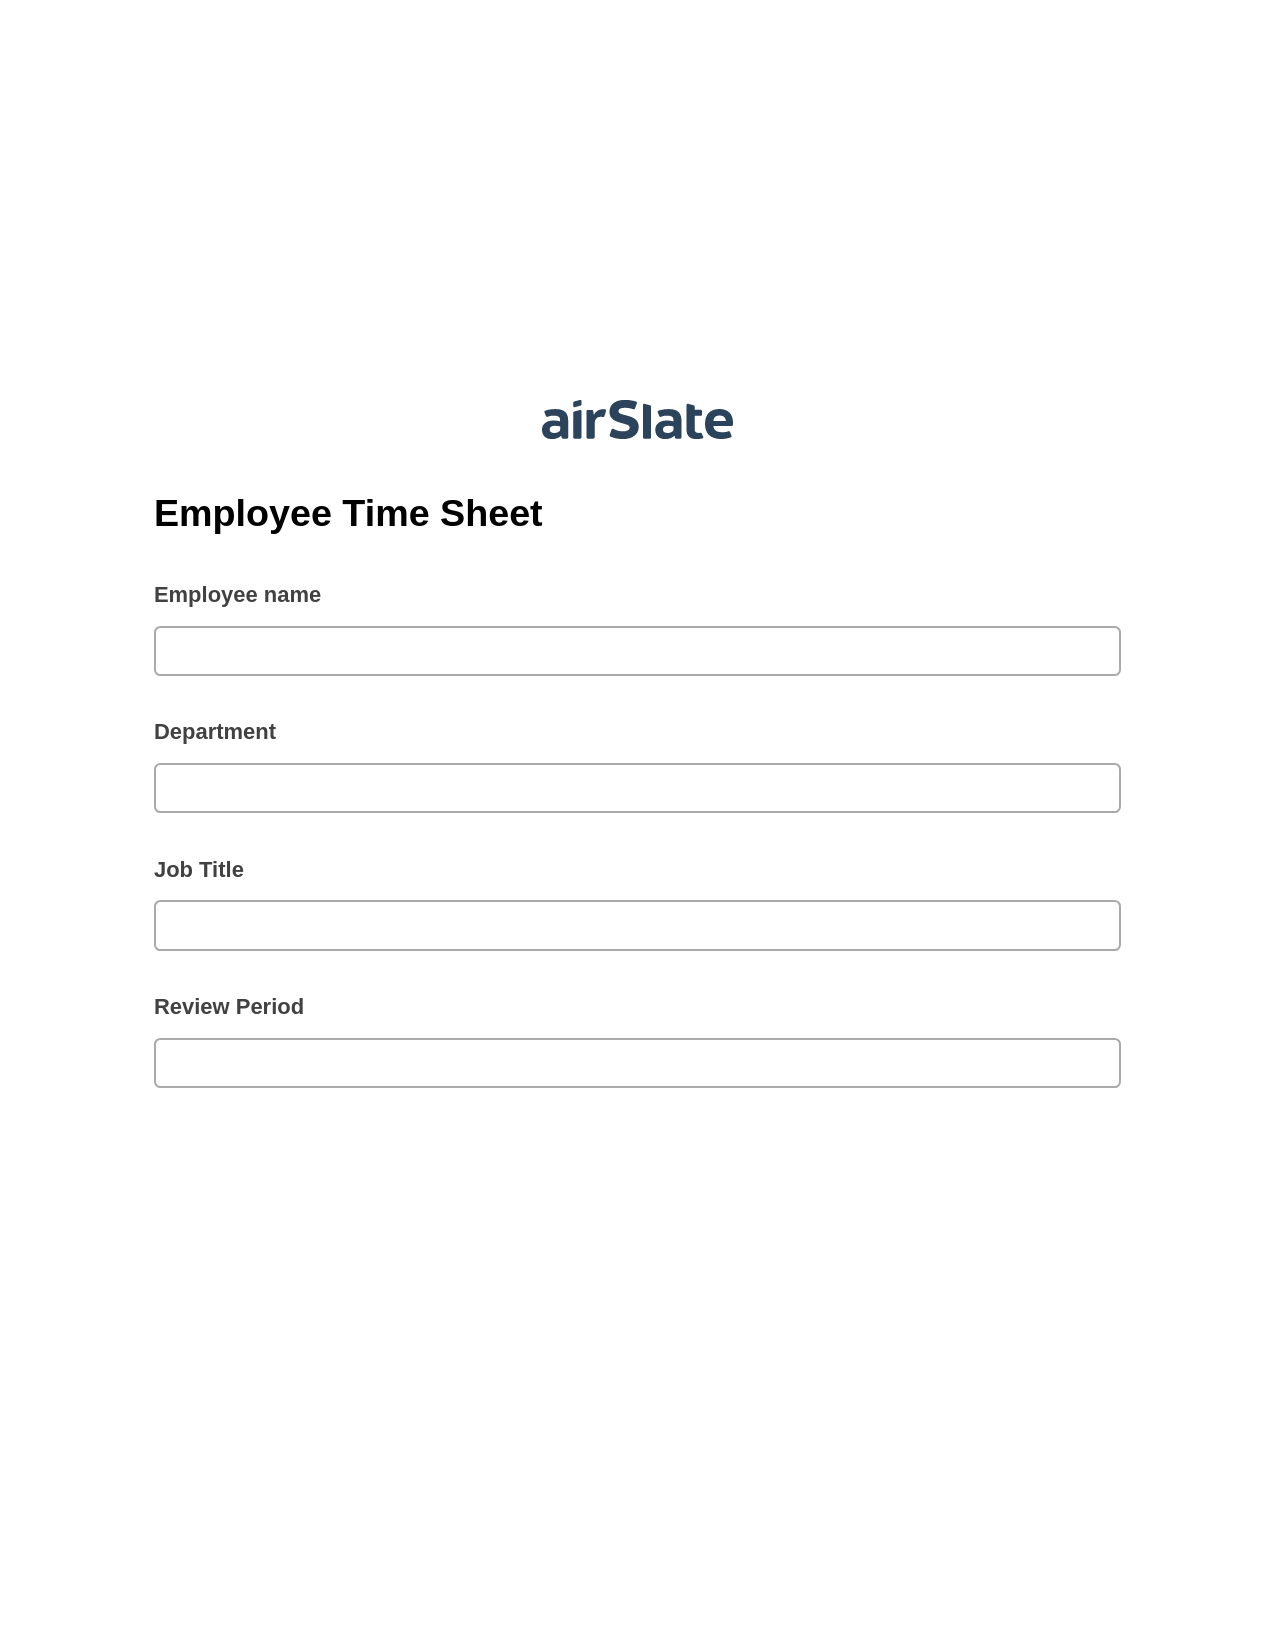 Multirole Employee Time Sheet Pre-fill from Office 365 Excel Bot, Send Mailchimp Campaign Bot, Archive to SharePoint Folder Bot